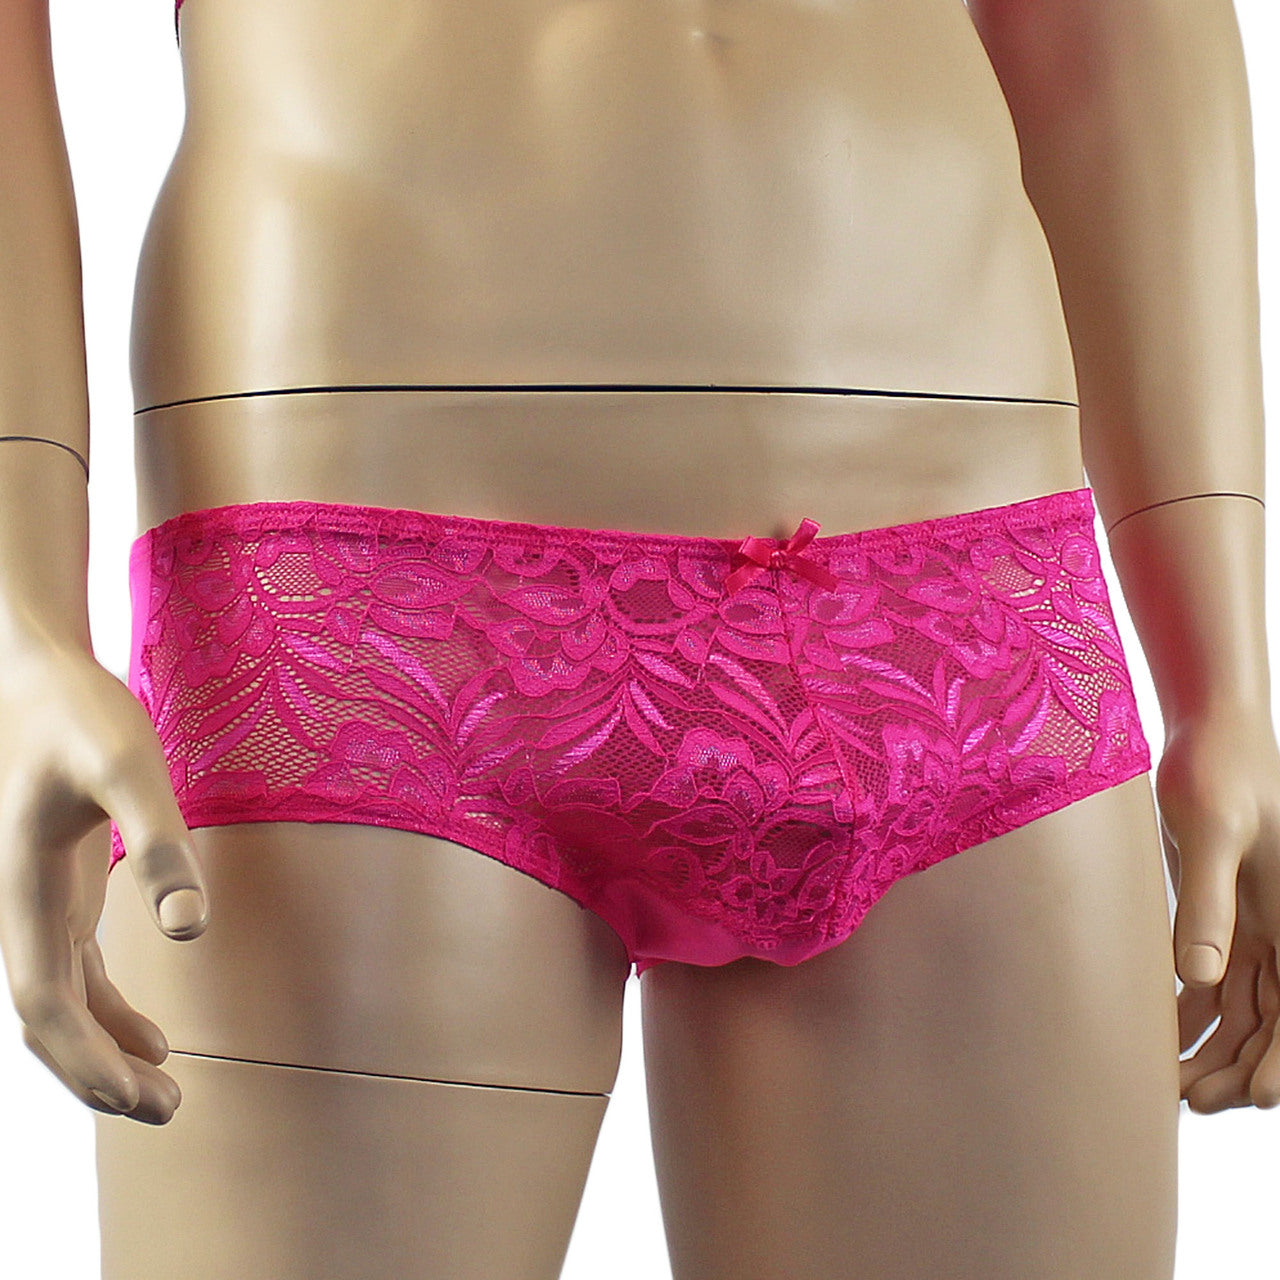 Mens Kristy Lingerie Sexy Lace and Mesh Panty Brief Hot Pink